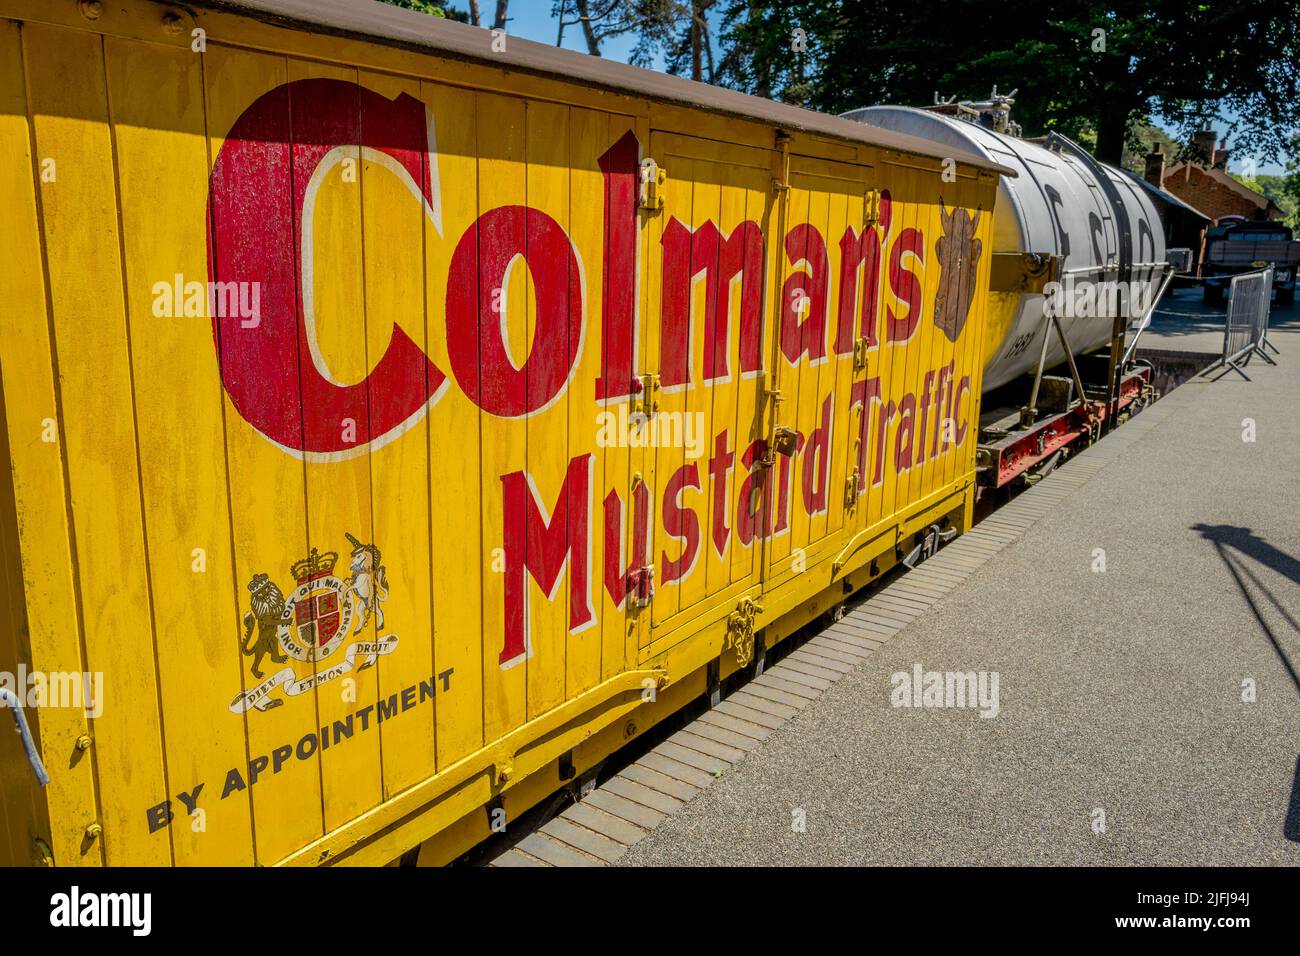 Colman’s mustard van in its distinctive yellow packaging and bull’s head logo. Stock Photo